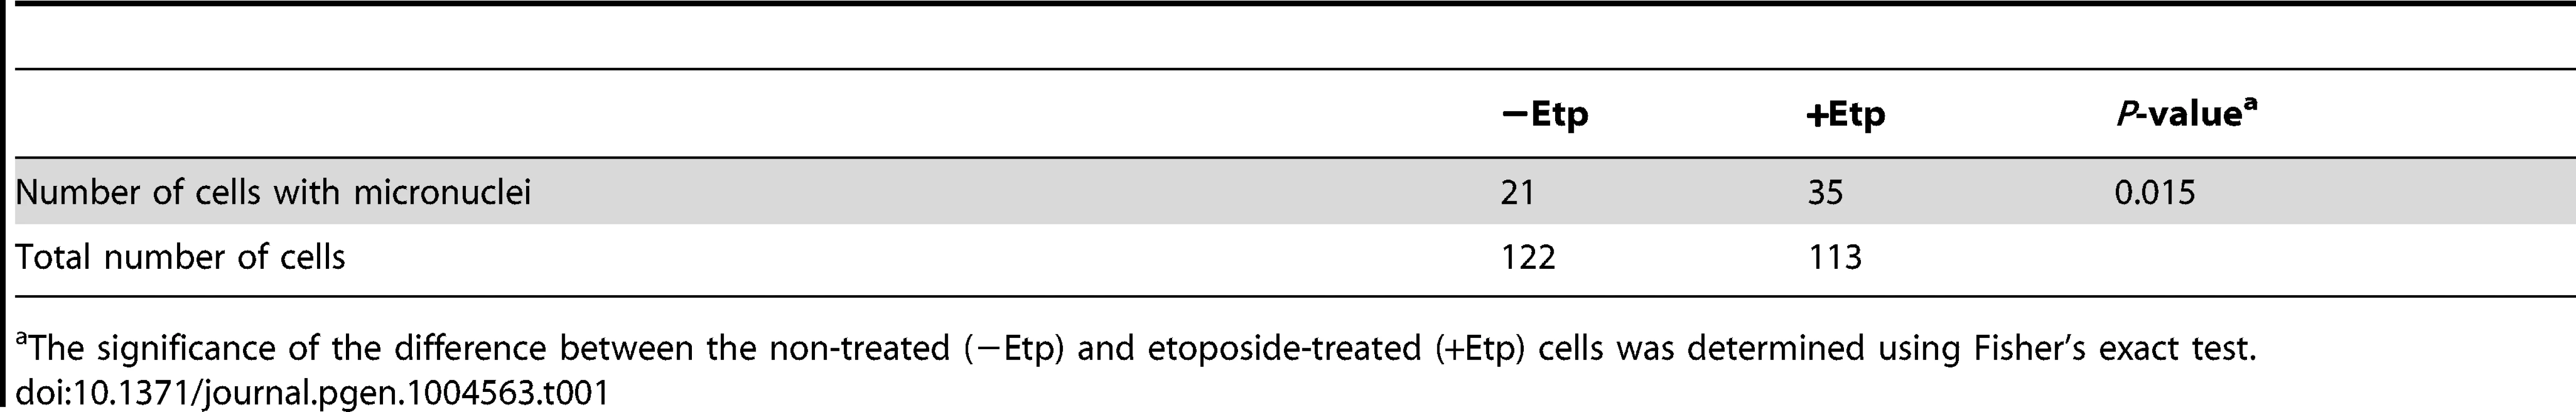 Formation of micronuclei in etoposide-treated or non-treated cells.